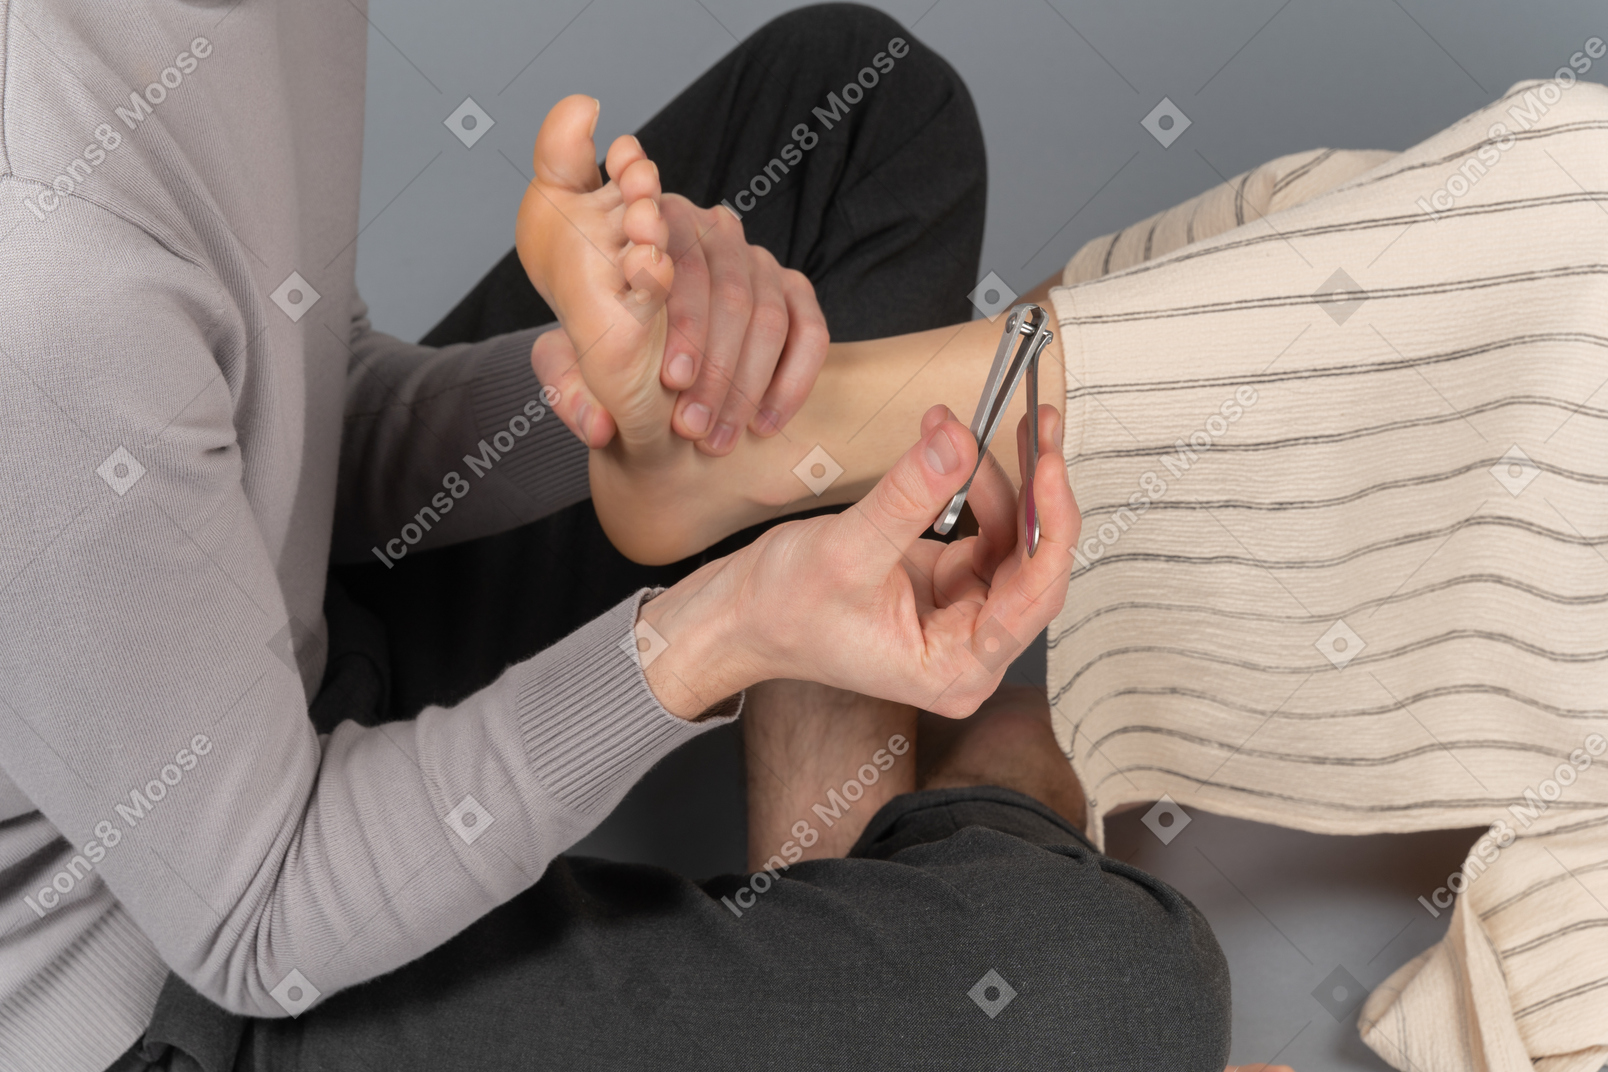 A man is about to cut woman`s toenails